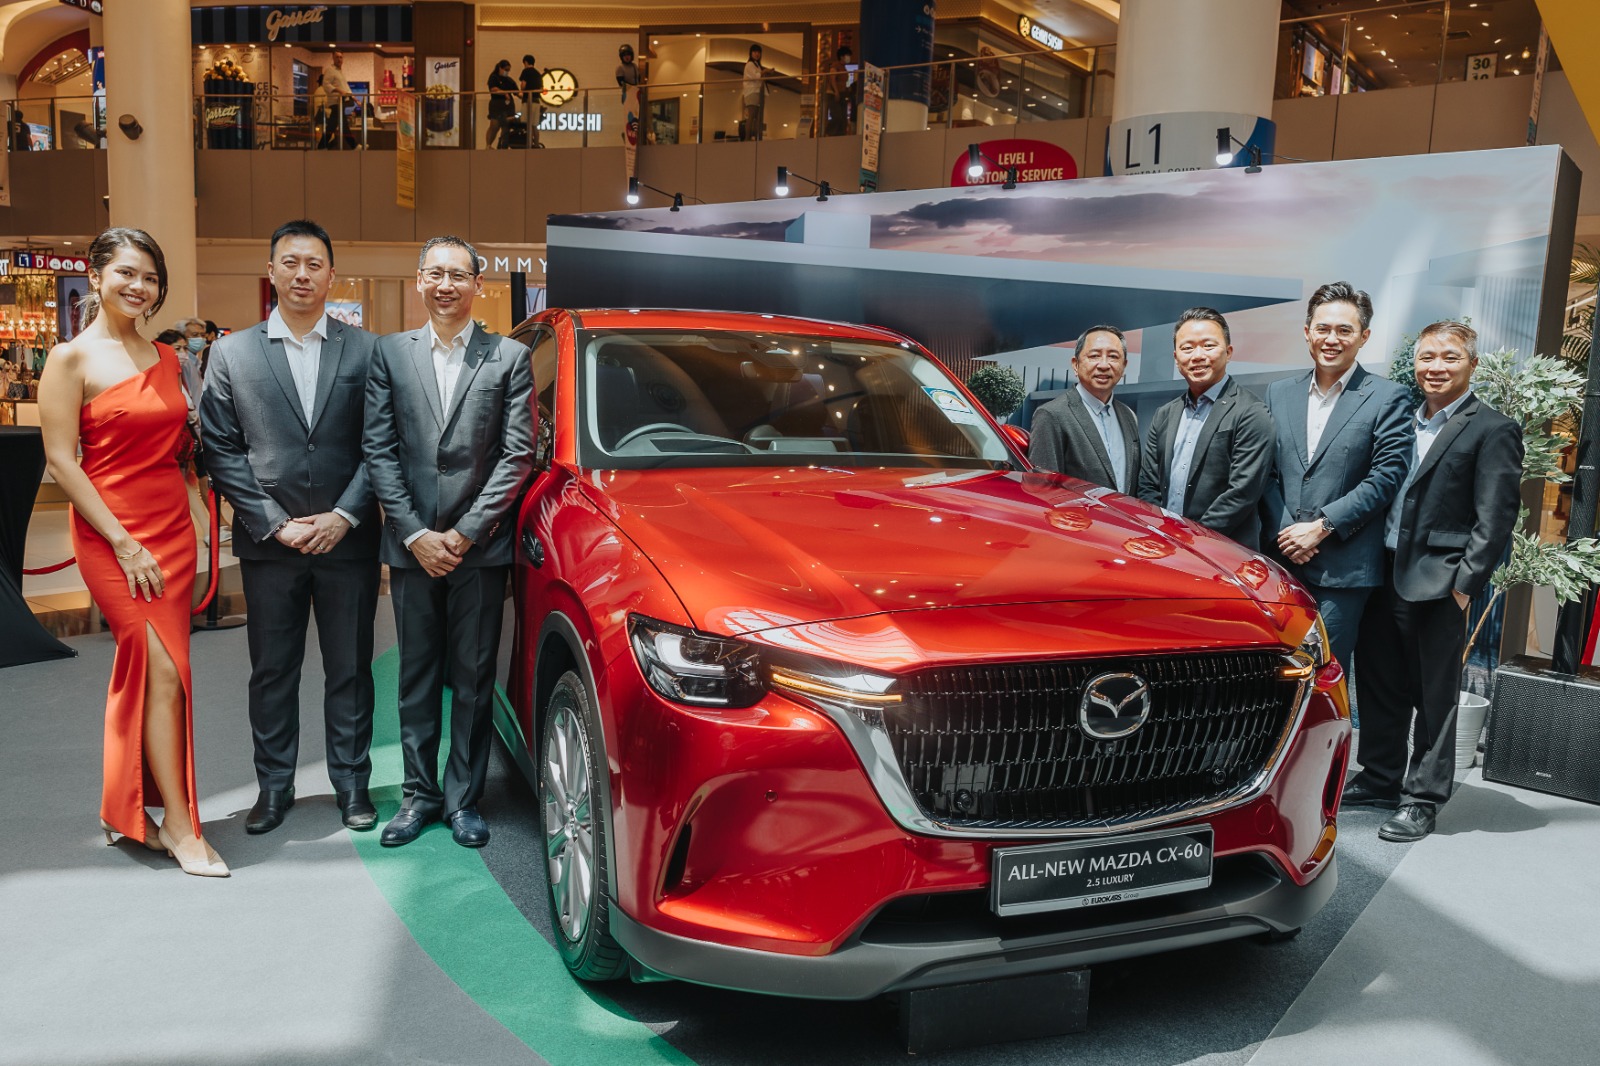 mazda cx-60, cx60, dezire+, eurokars, chong kah wei, karsono kwee, mazda, mazdaspeed, cx-60, mazda cx-60, eurokars, dezire+ lifestyle programme launched with mazda cx-60 in singapore : mazda’s deep dezire+